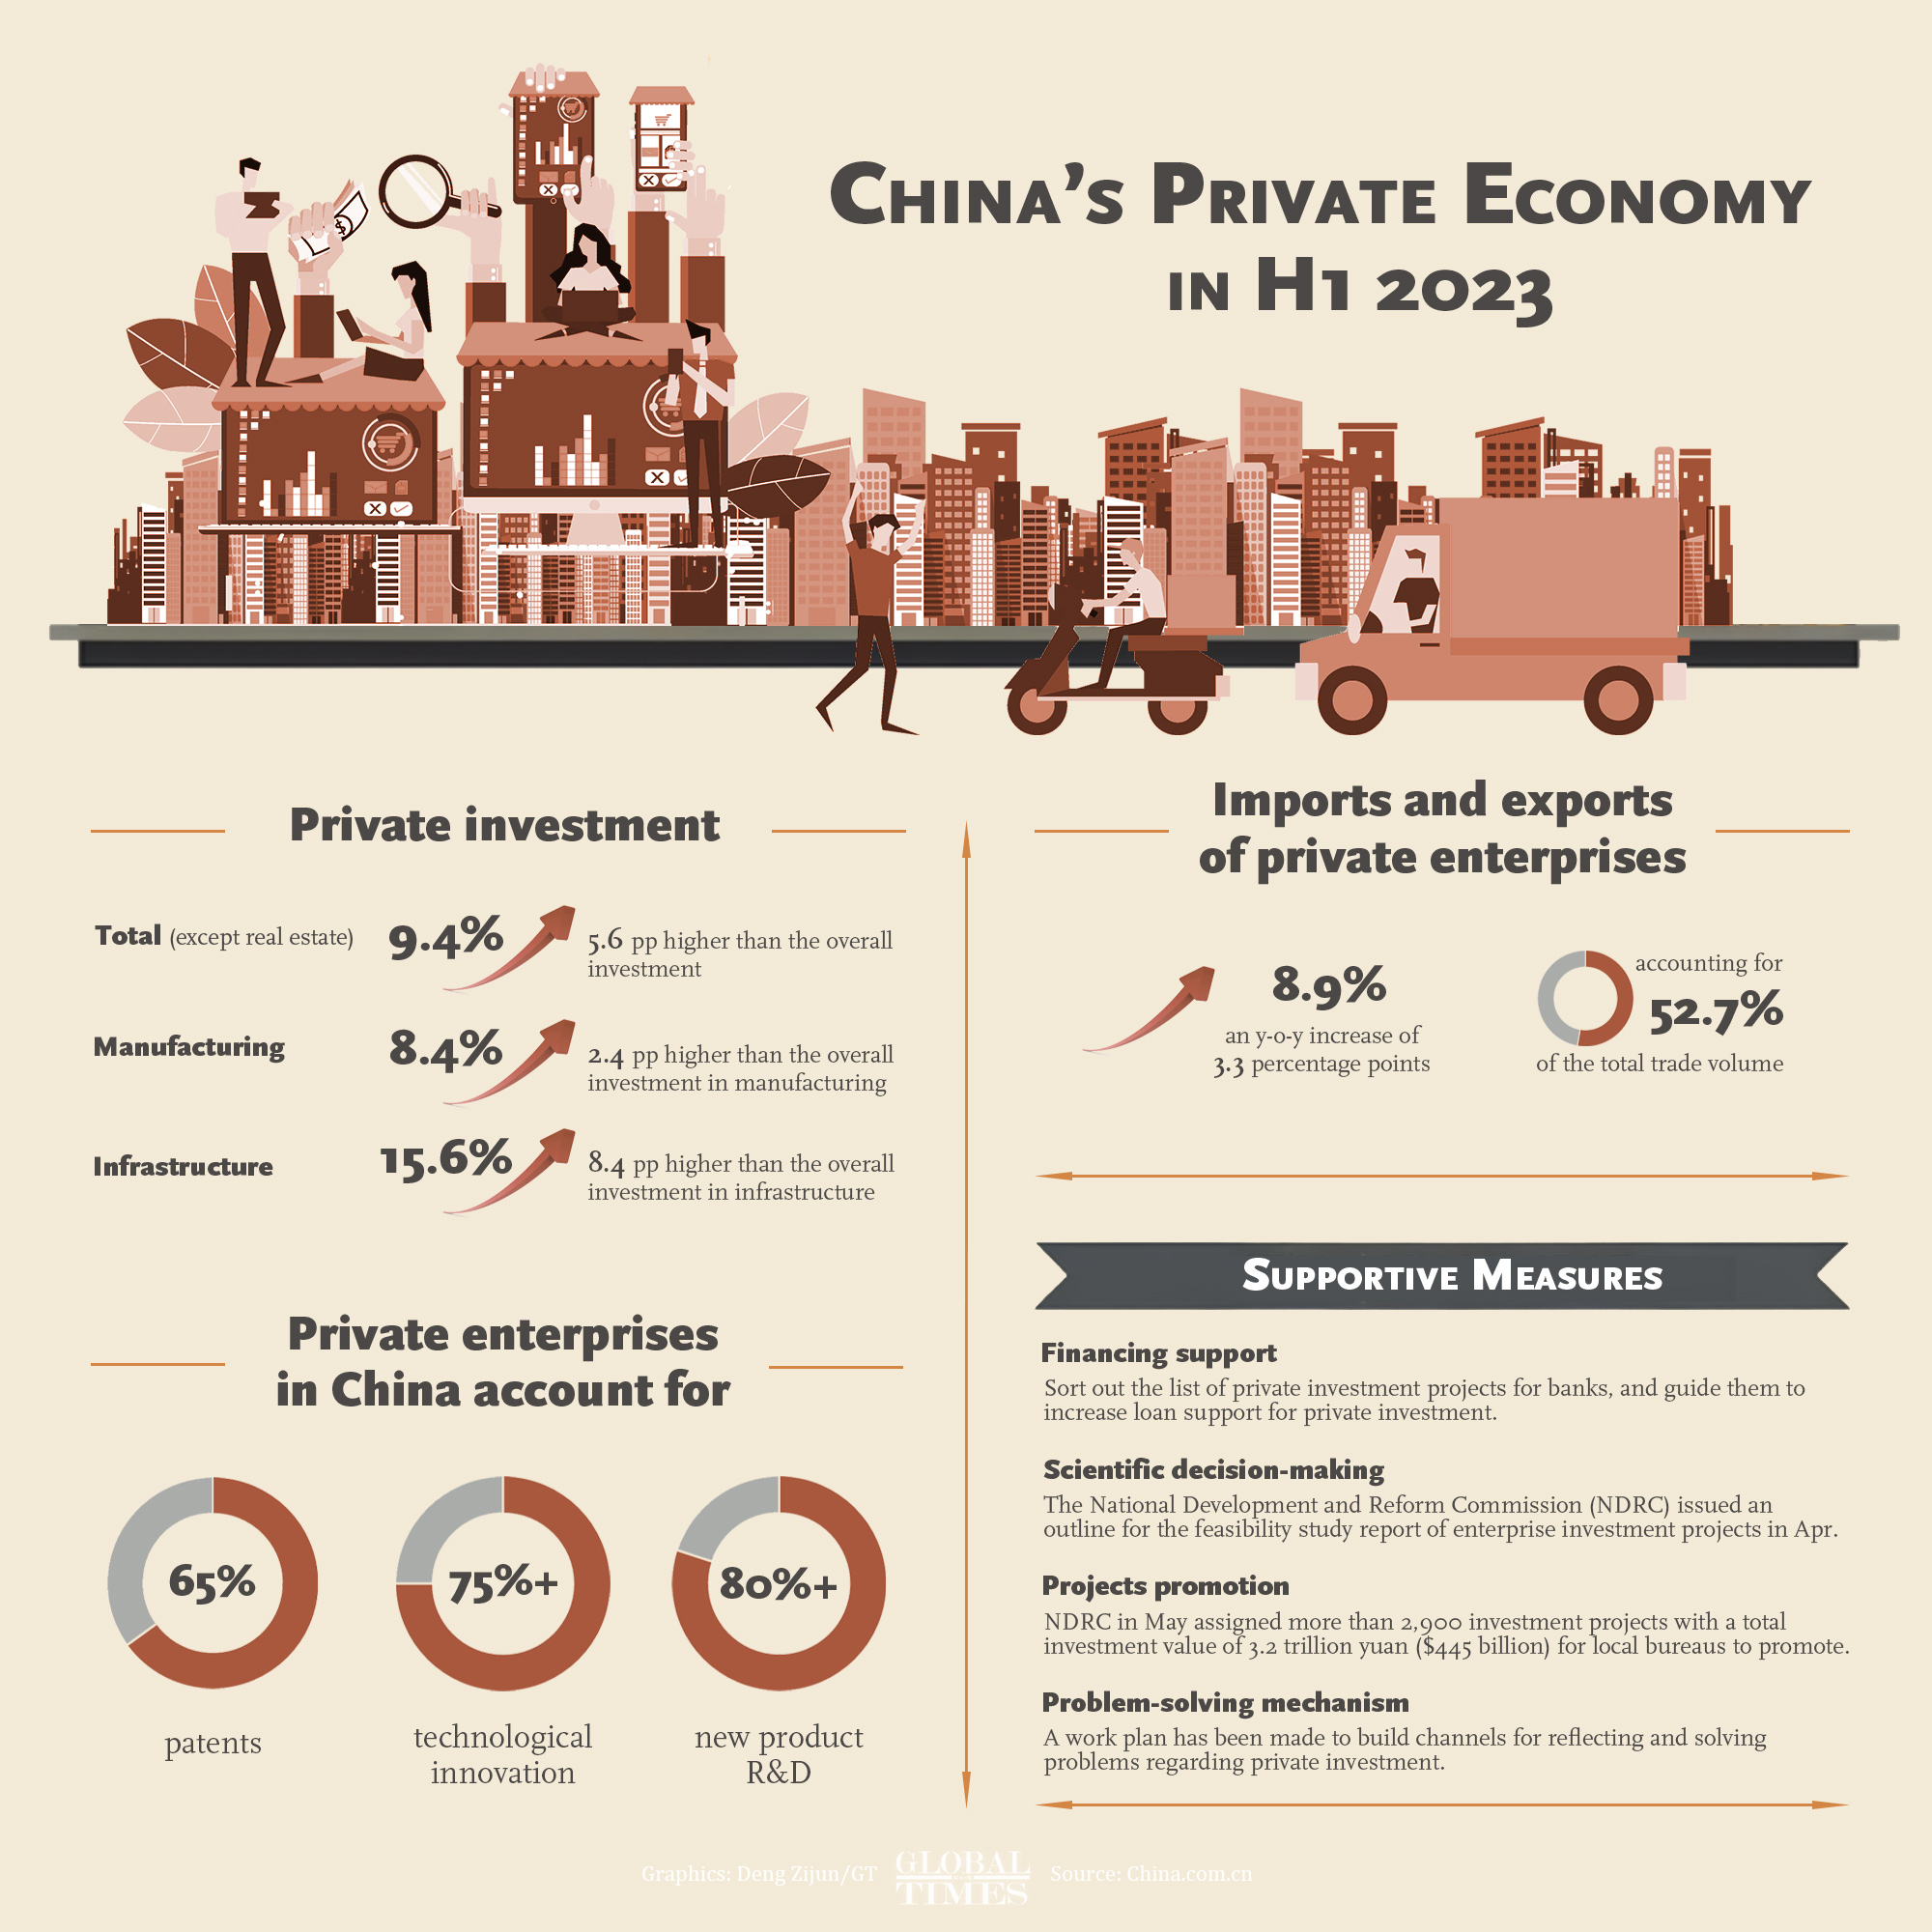 China's private economy in H1 2023